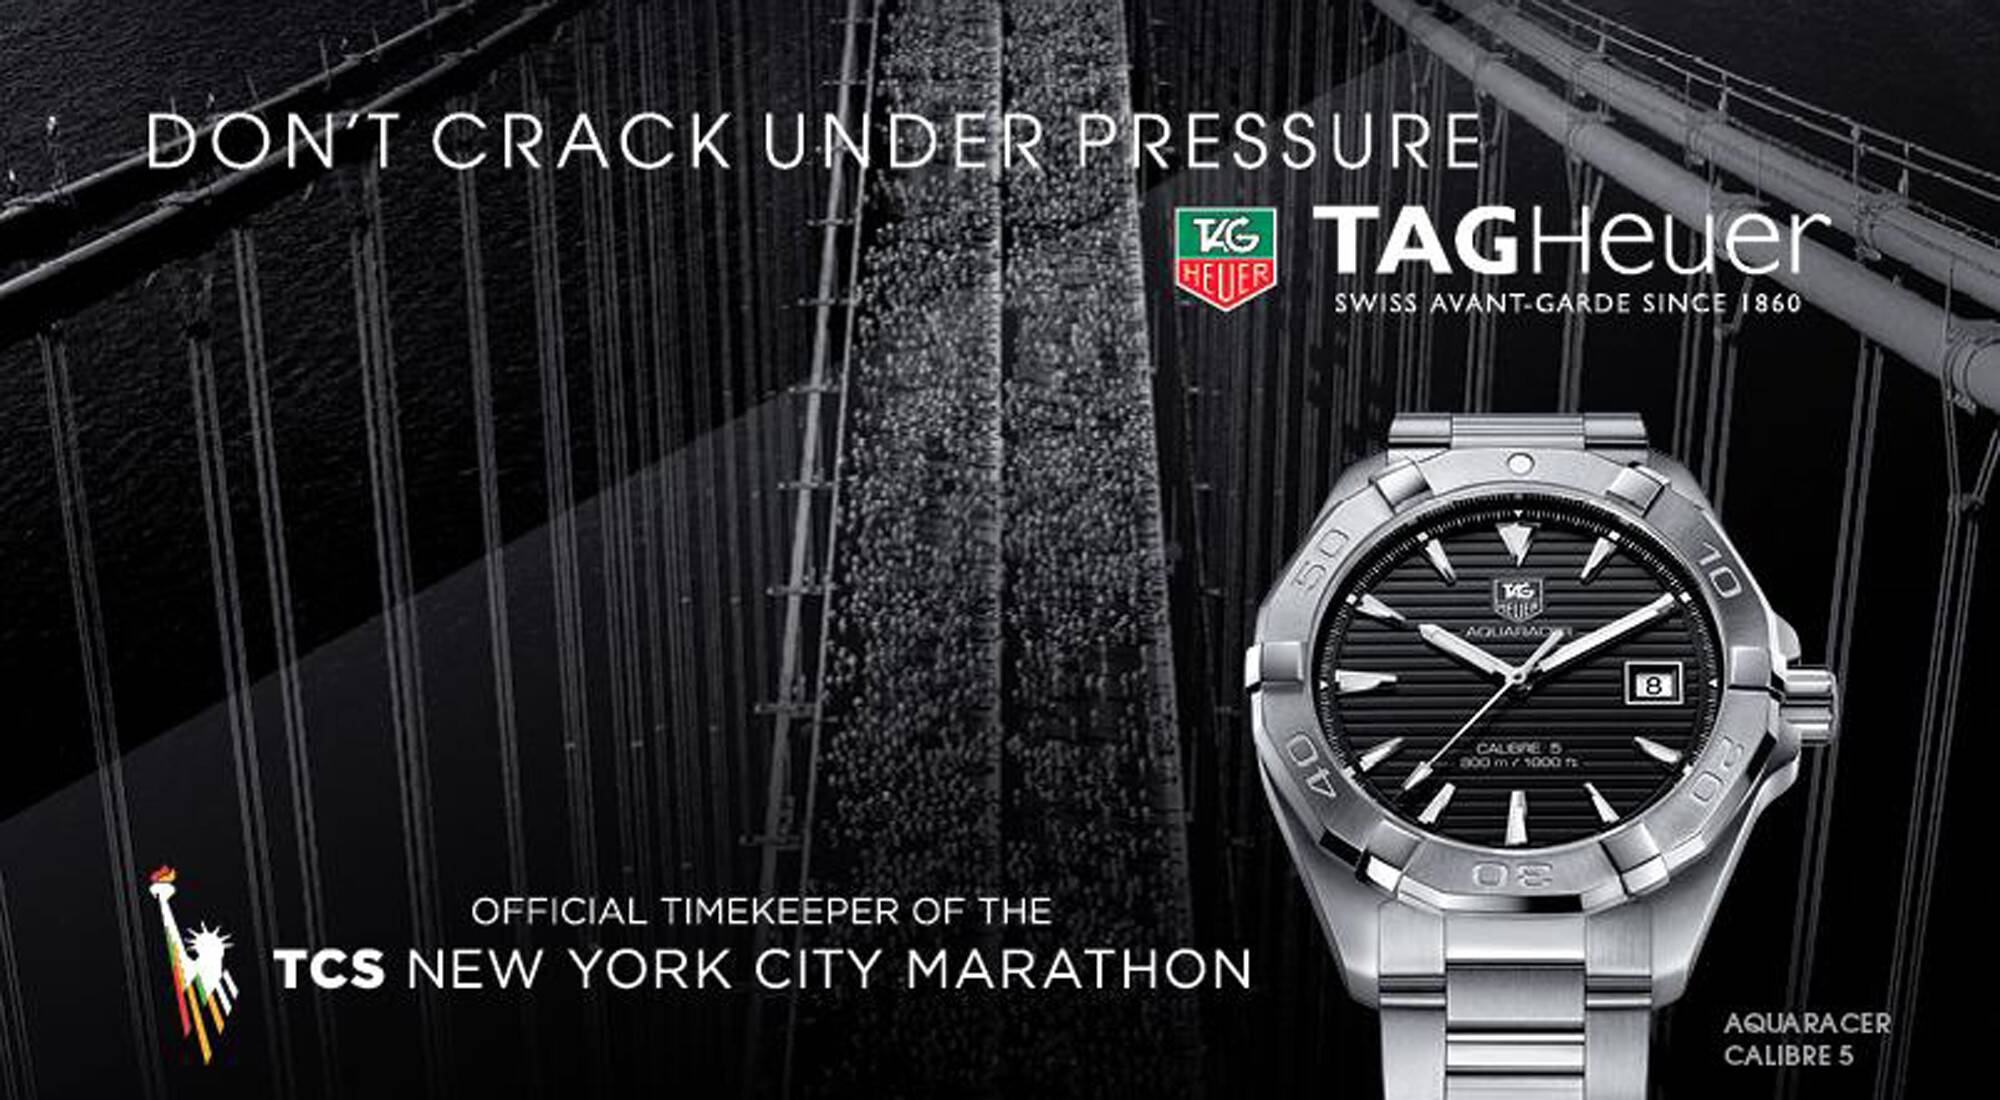 Don’t Crack Under Pressure: the TAG Heuer challenge - LVMH2000 x 1100